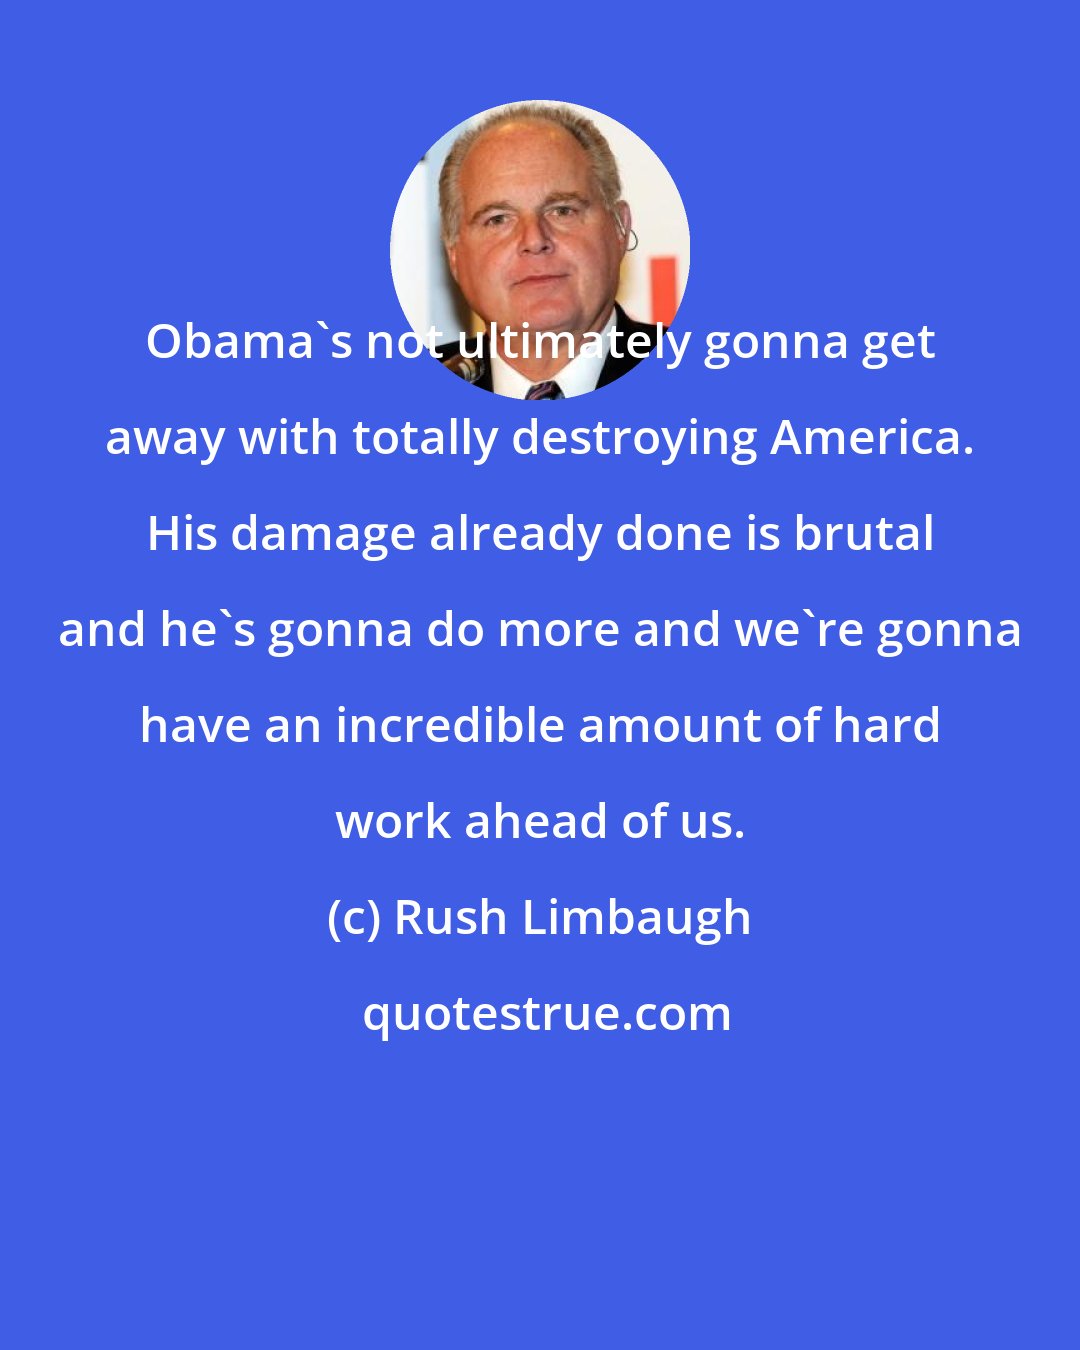 Rush Limbaugh: Obama's not ultimately gonna get away with totally destroying America. His damage already done is brutal and he's gonna do more and we're gonna have an incredible amount of hard work ahead of us.